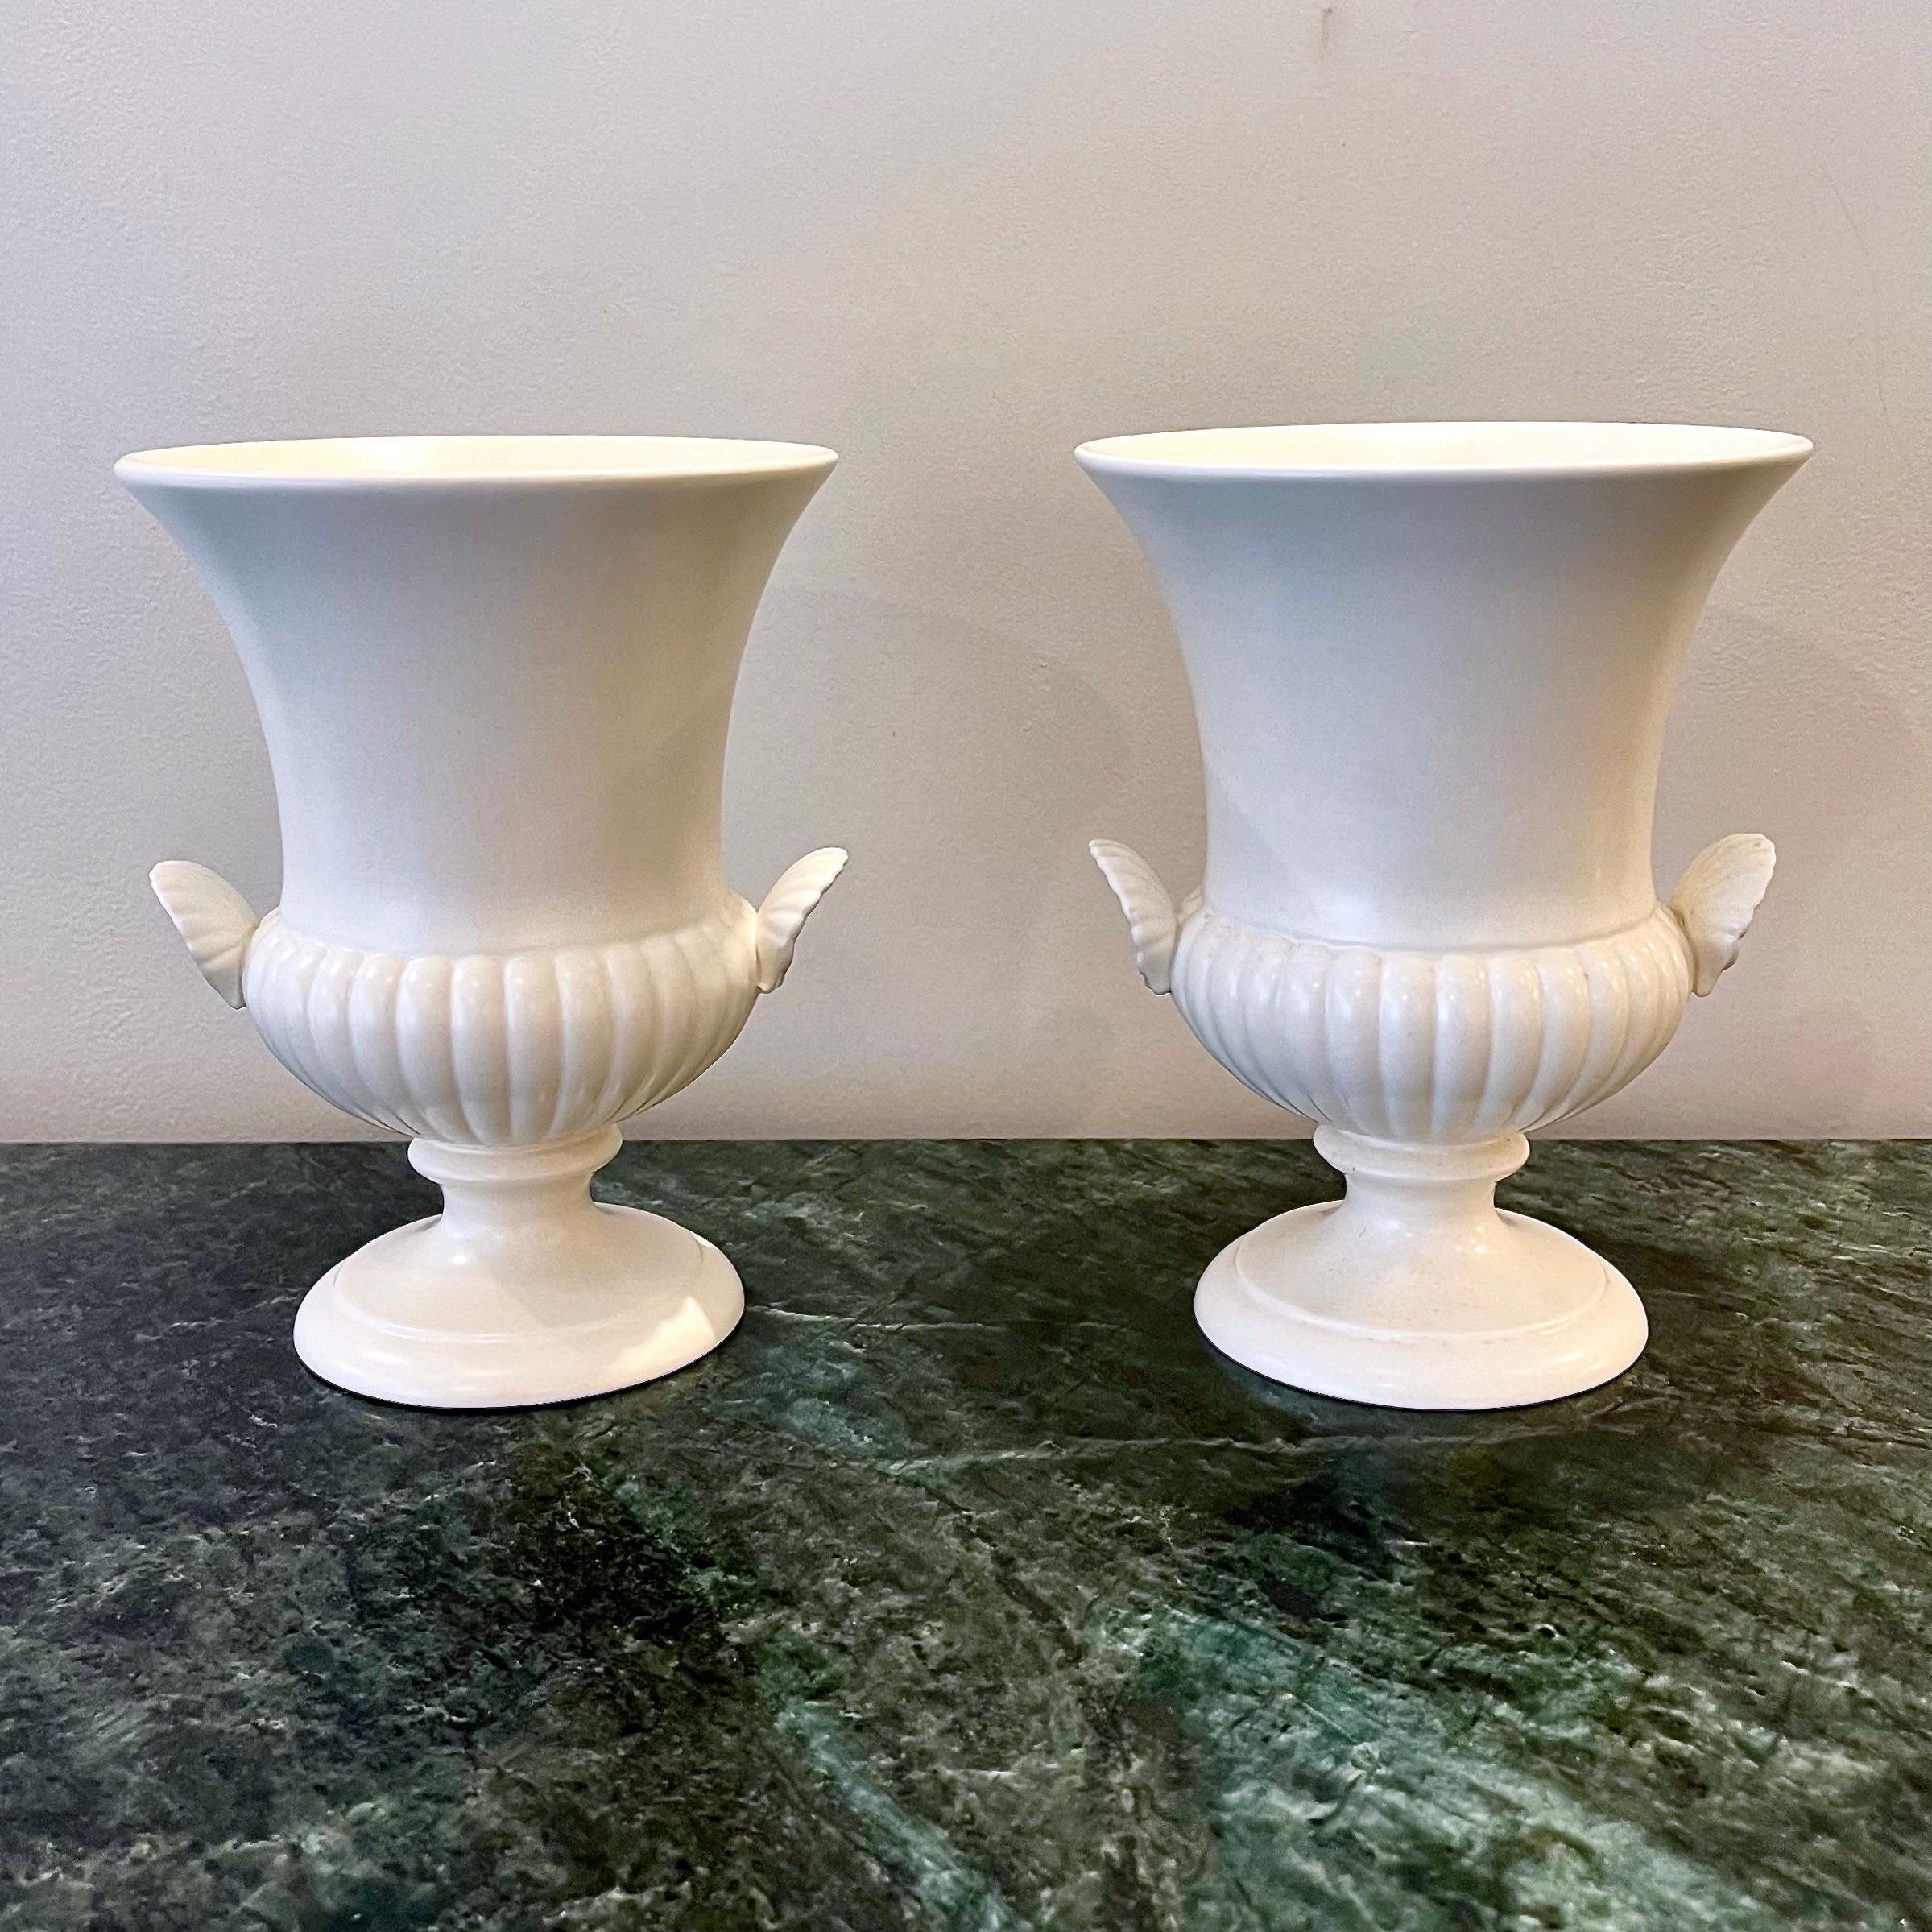 Wedgwood Pair of Pedestal Medici form Shell Twin Handled Urn Vases In Good Condition For Sale In London, GB